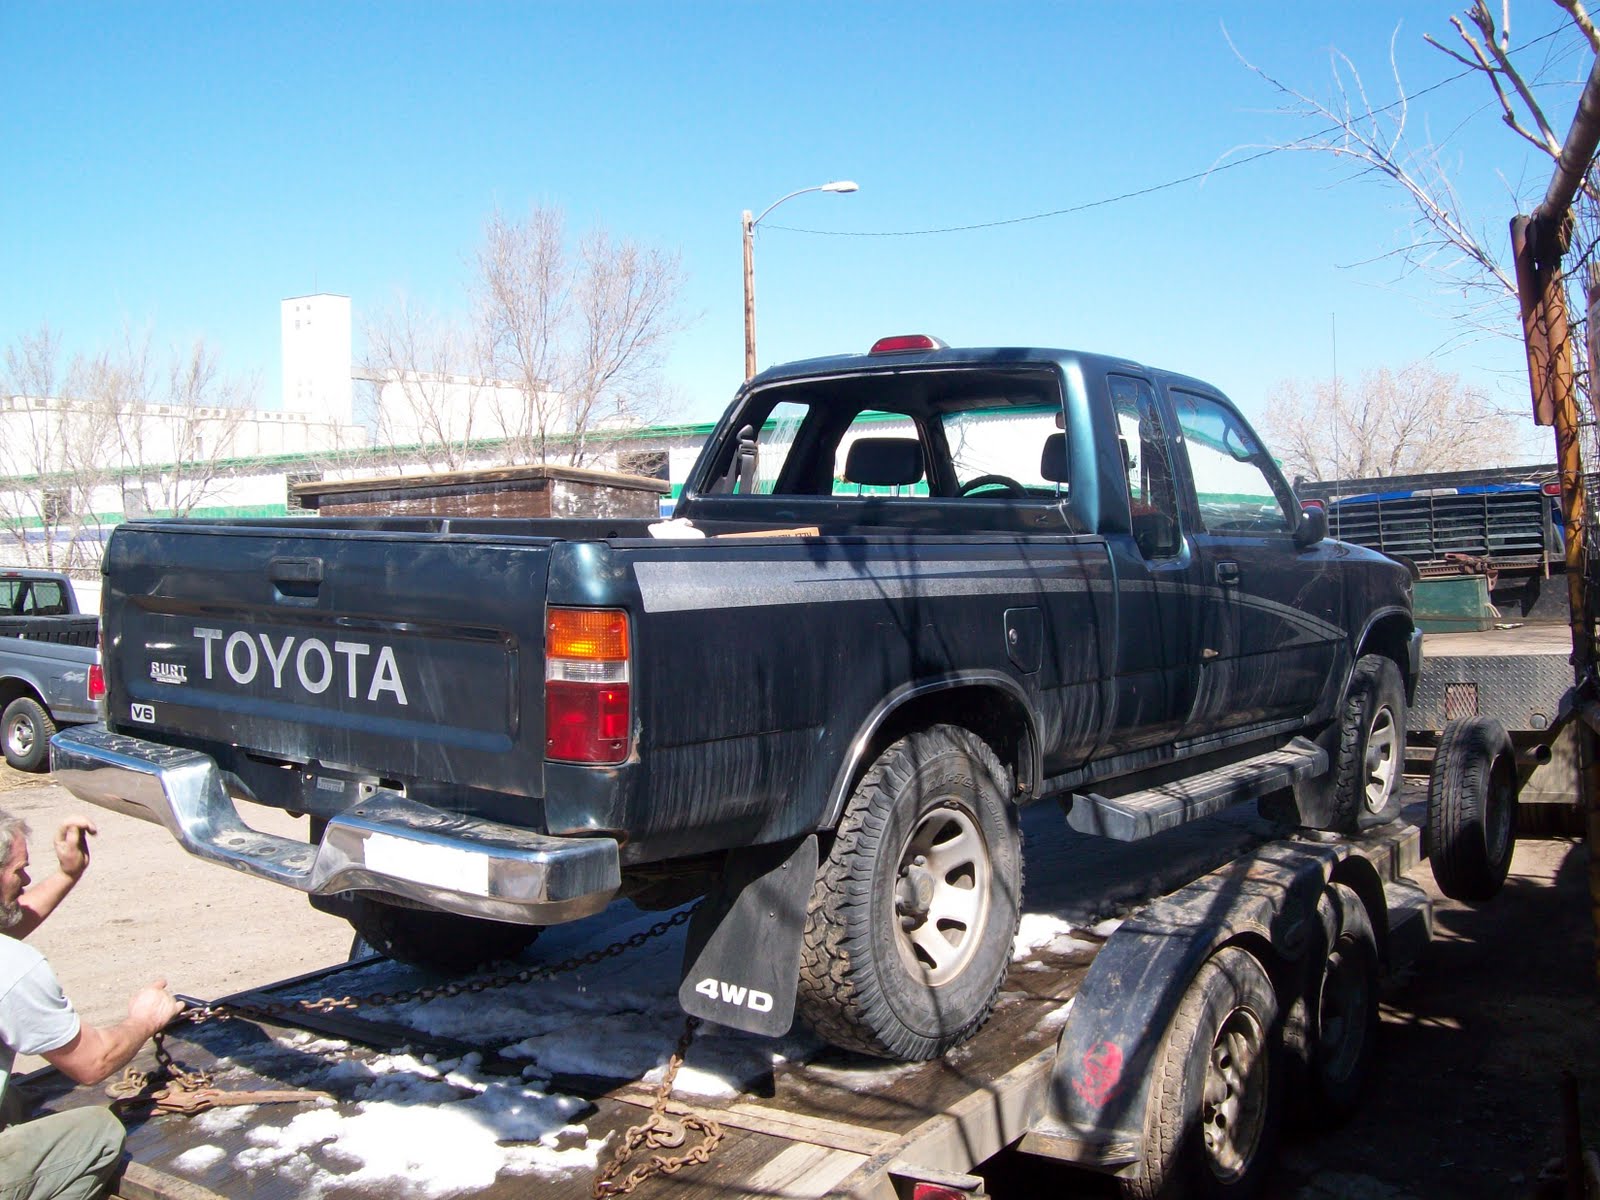 New Arrivals at Jim's Used Toyota Truck Parts: April 2010